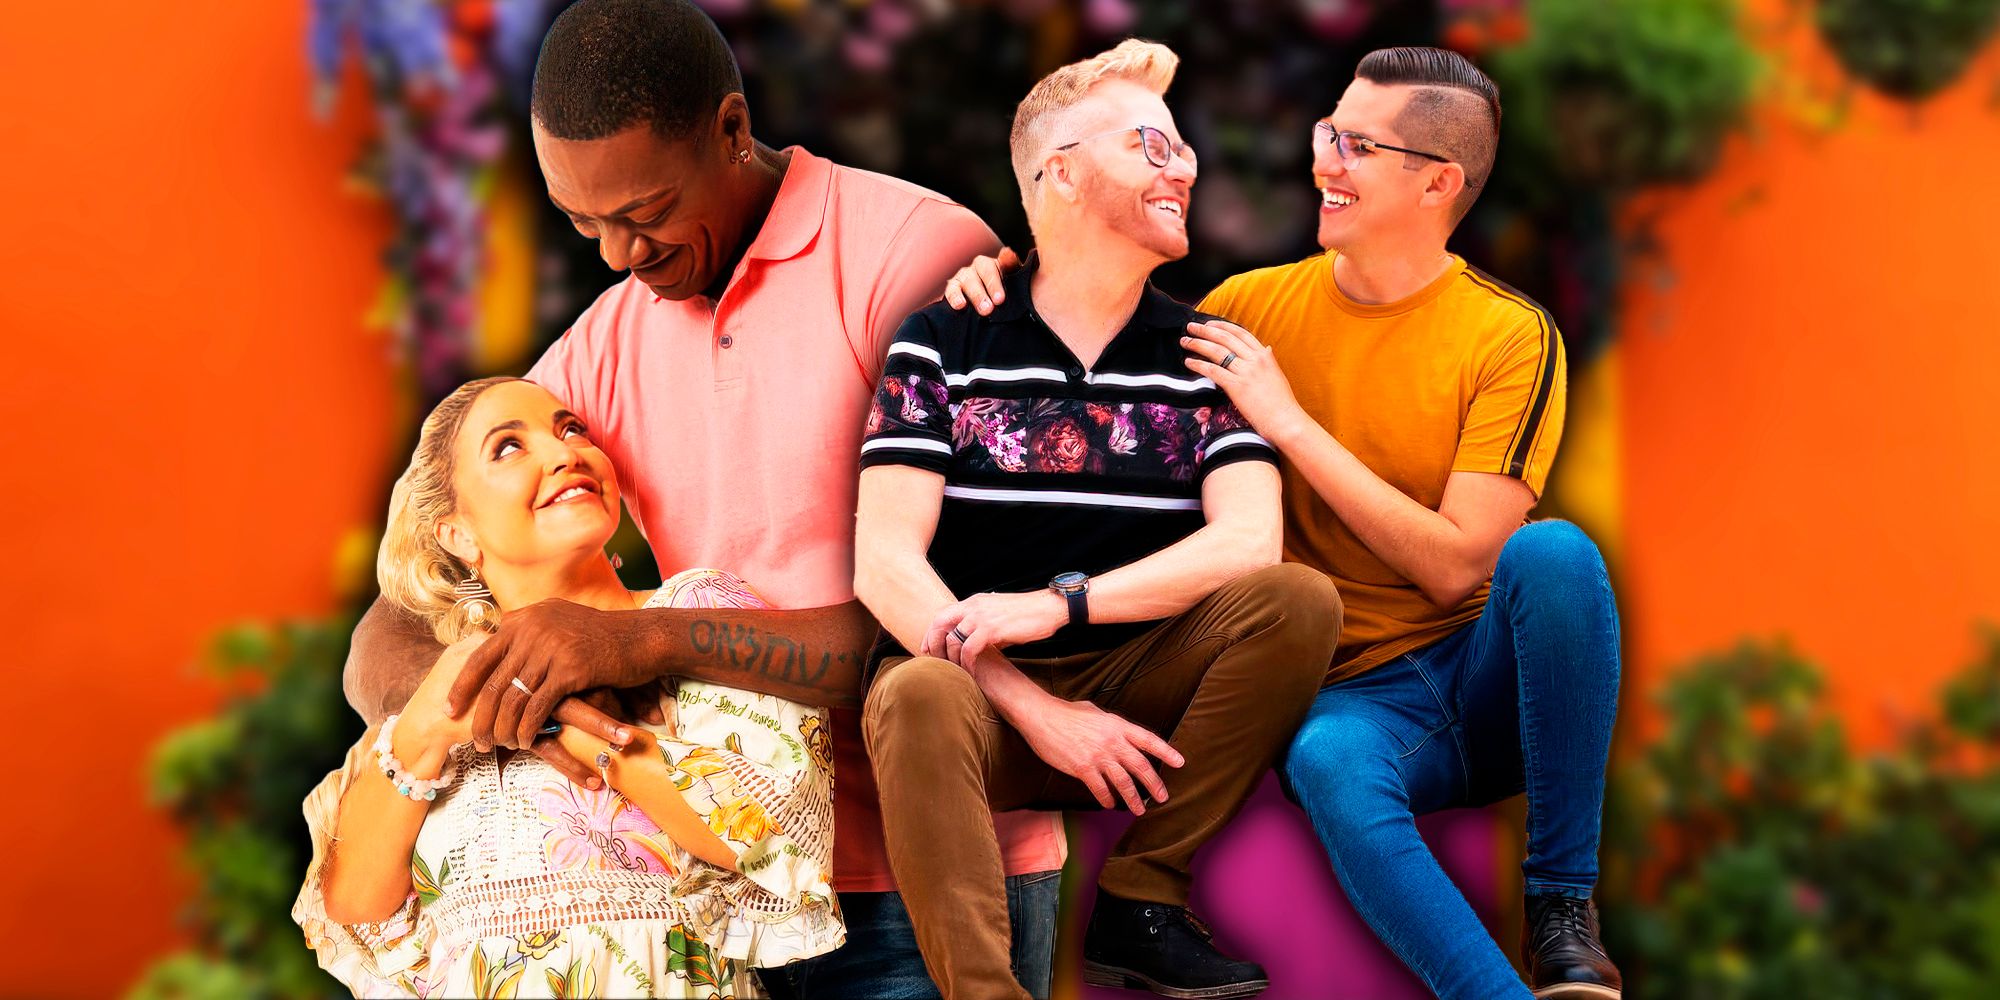 90 Day Fiancé: The Other Way Season 5 cast members in a montage image.